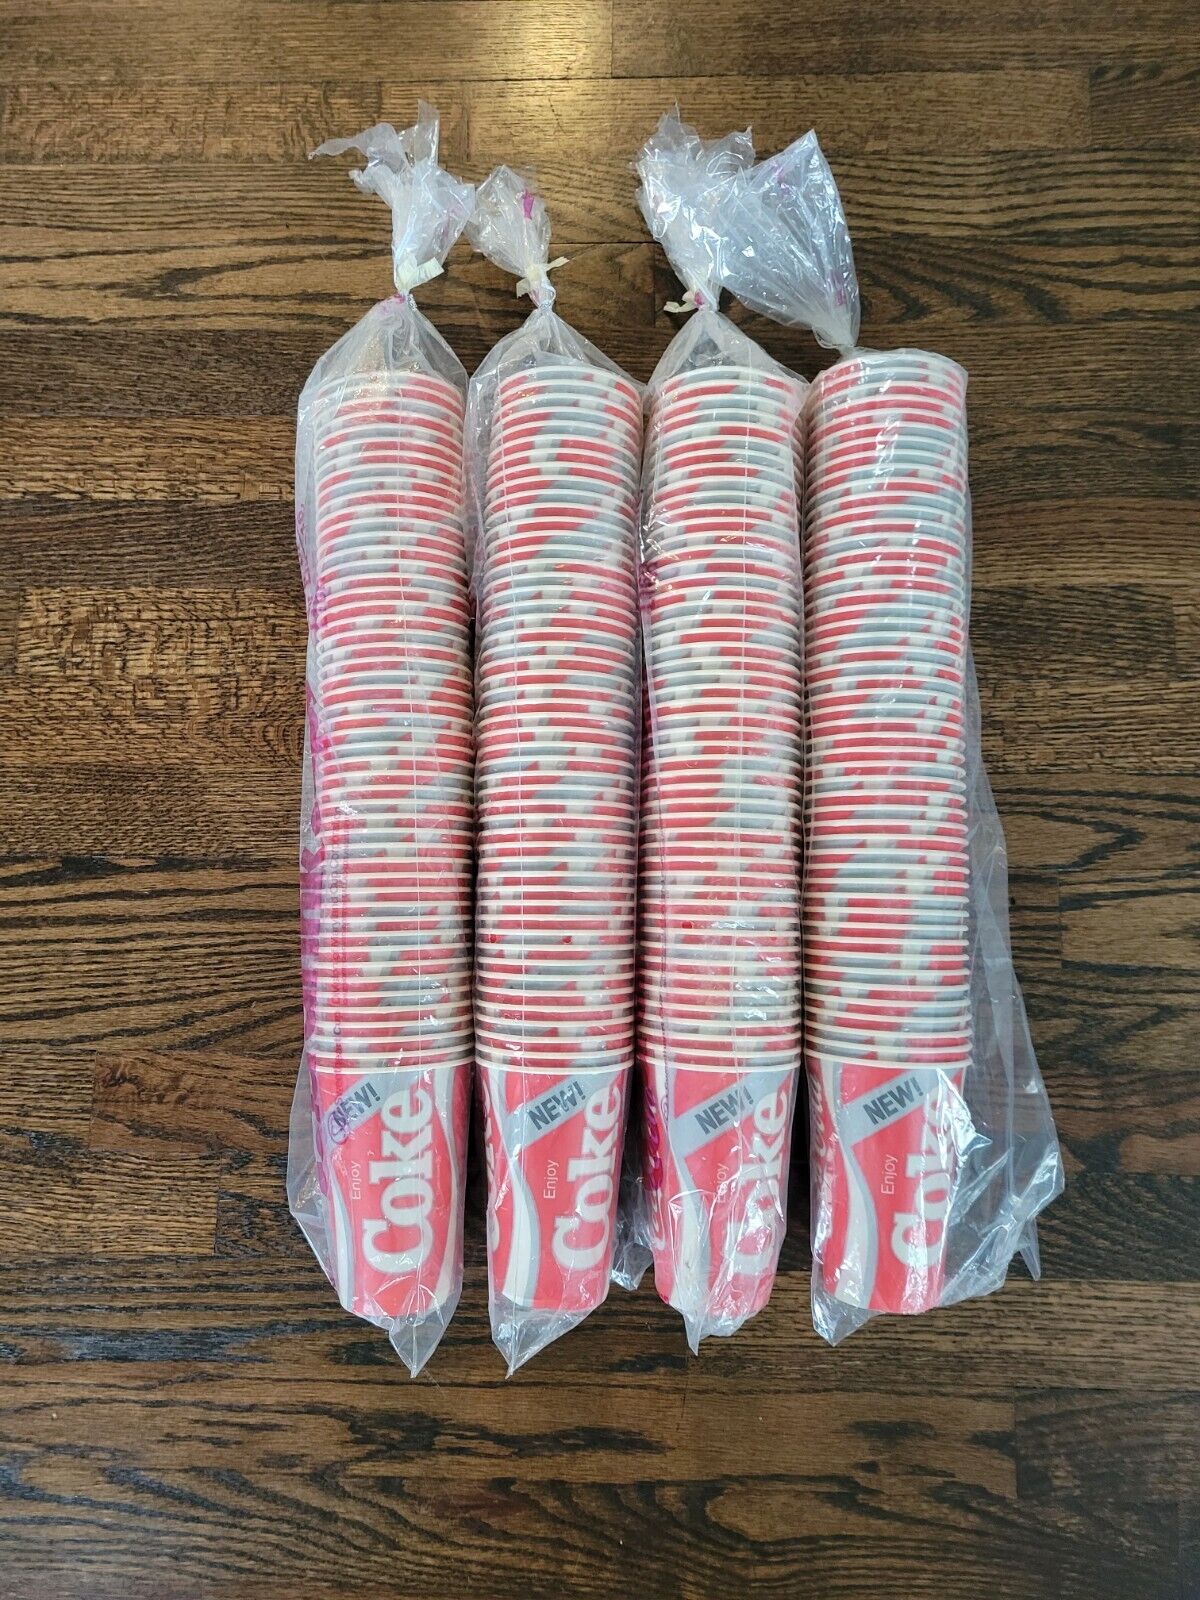 Vintage Coca Cola Coke Wax Coated Cups 16oz Cups 4 Packs of 50 (200 Total) New 